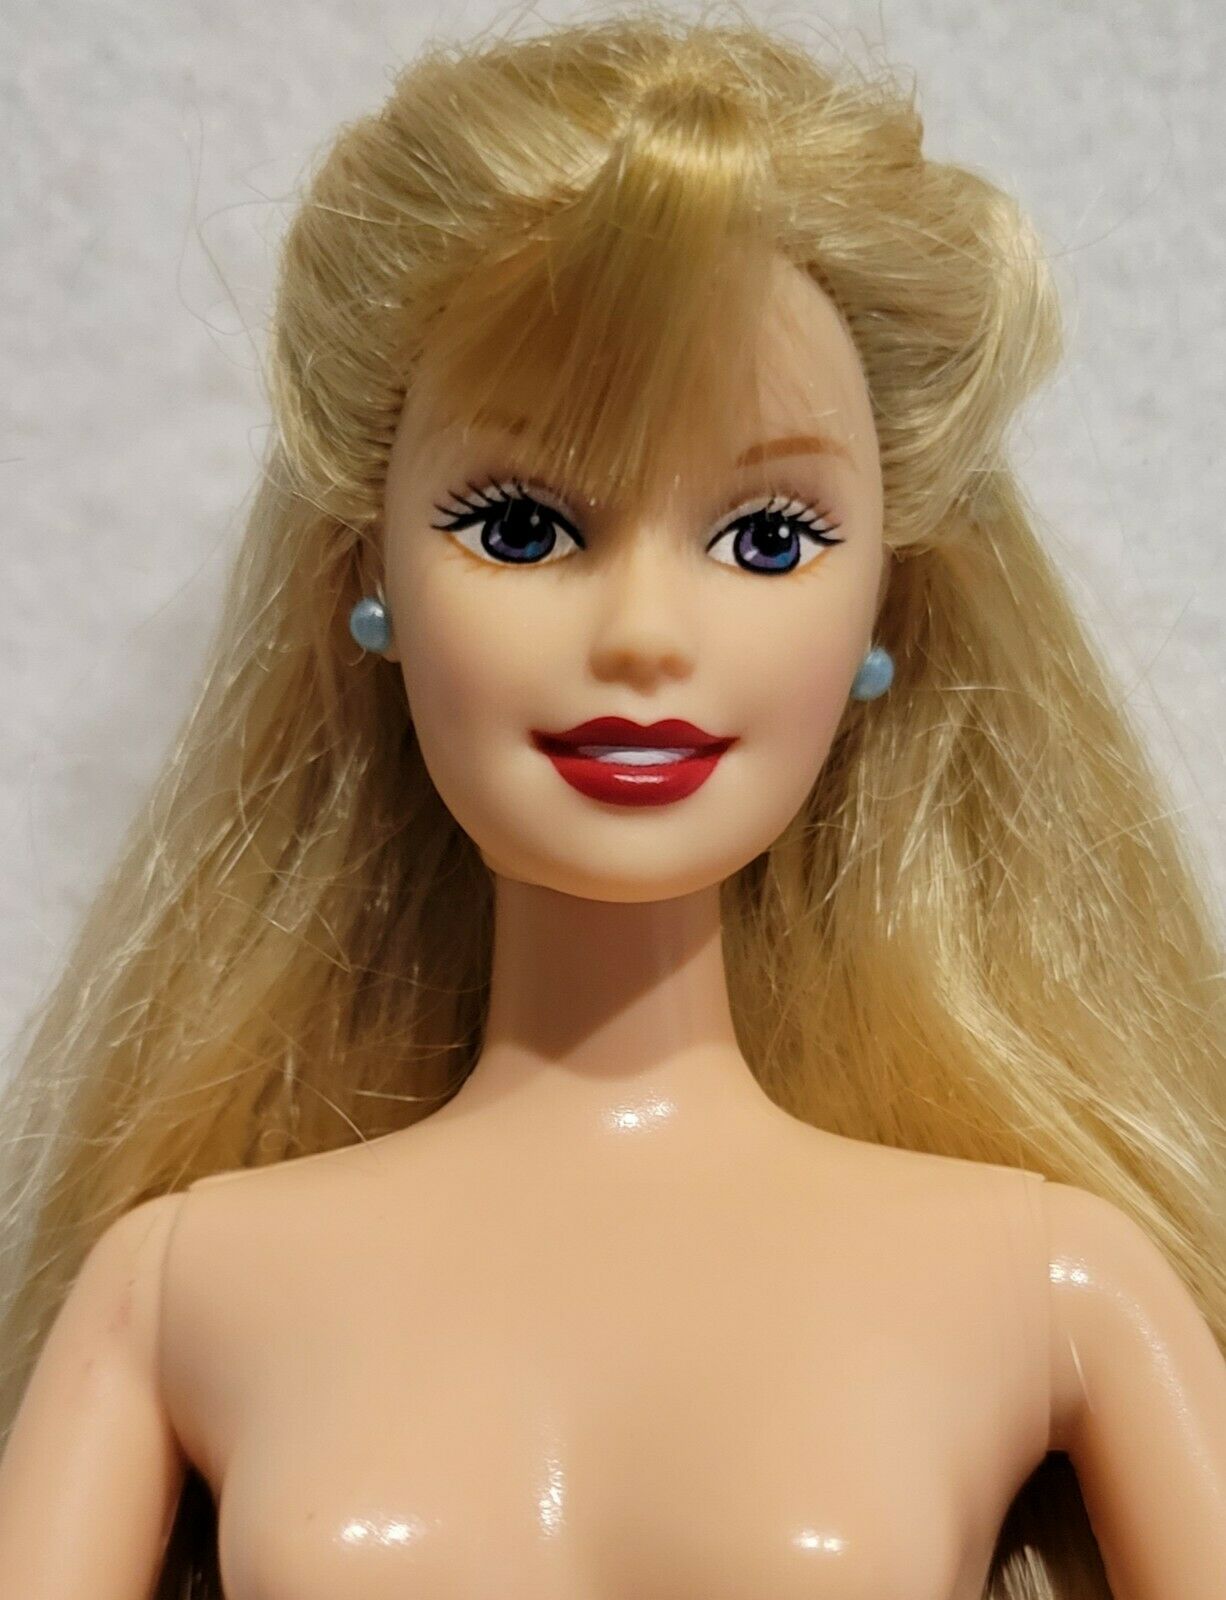 Barbie Doll Generation Girl Jointed